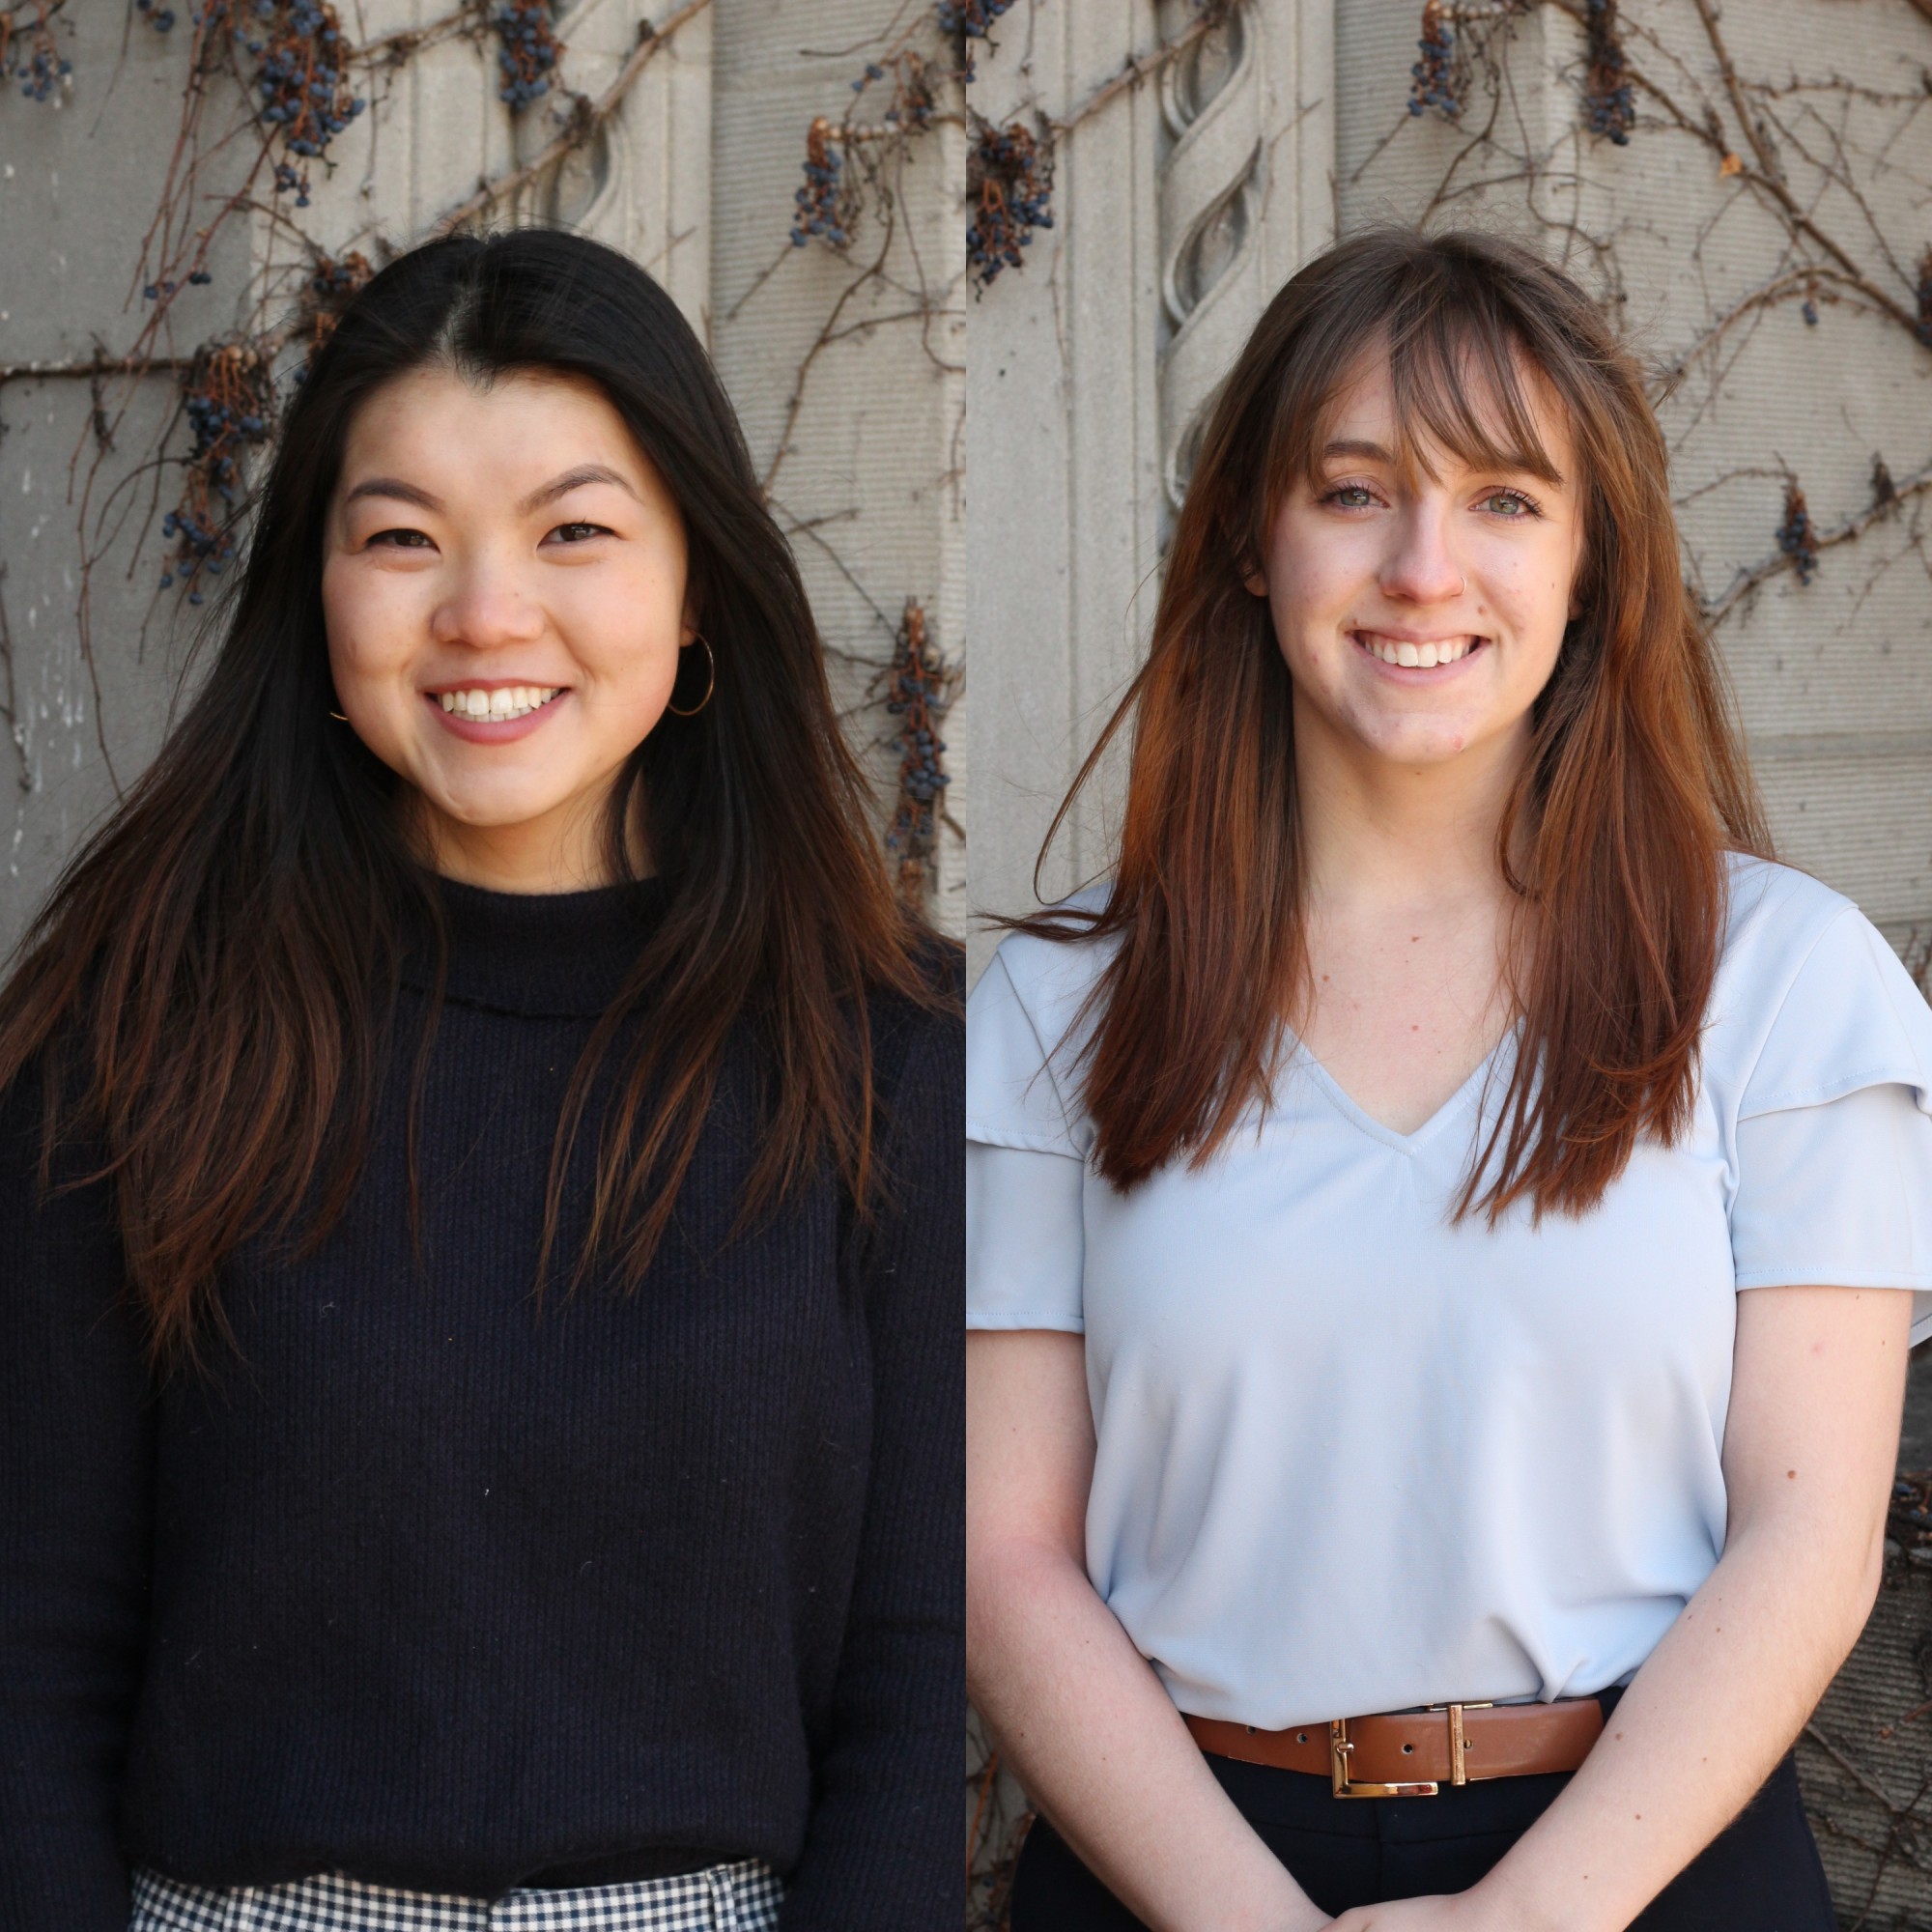 Presidential candidate Amy Ma, left, and vice presidential candidate Becca Cowin, right. Courtesy of the candidates.